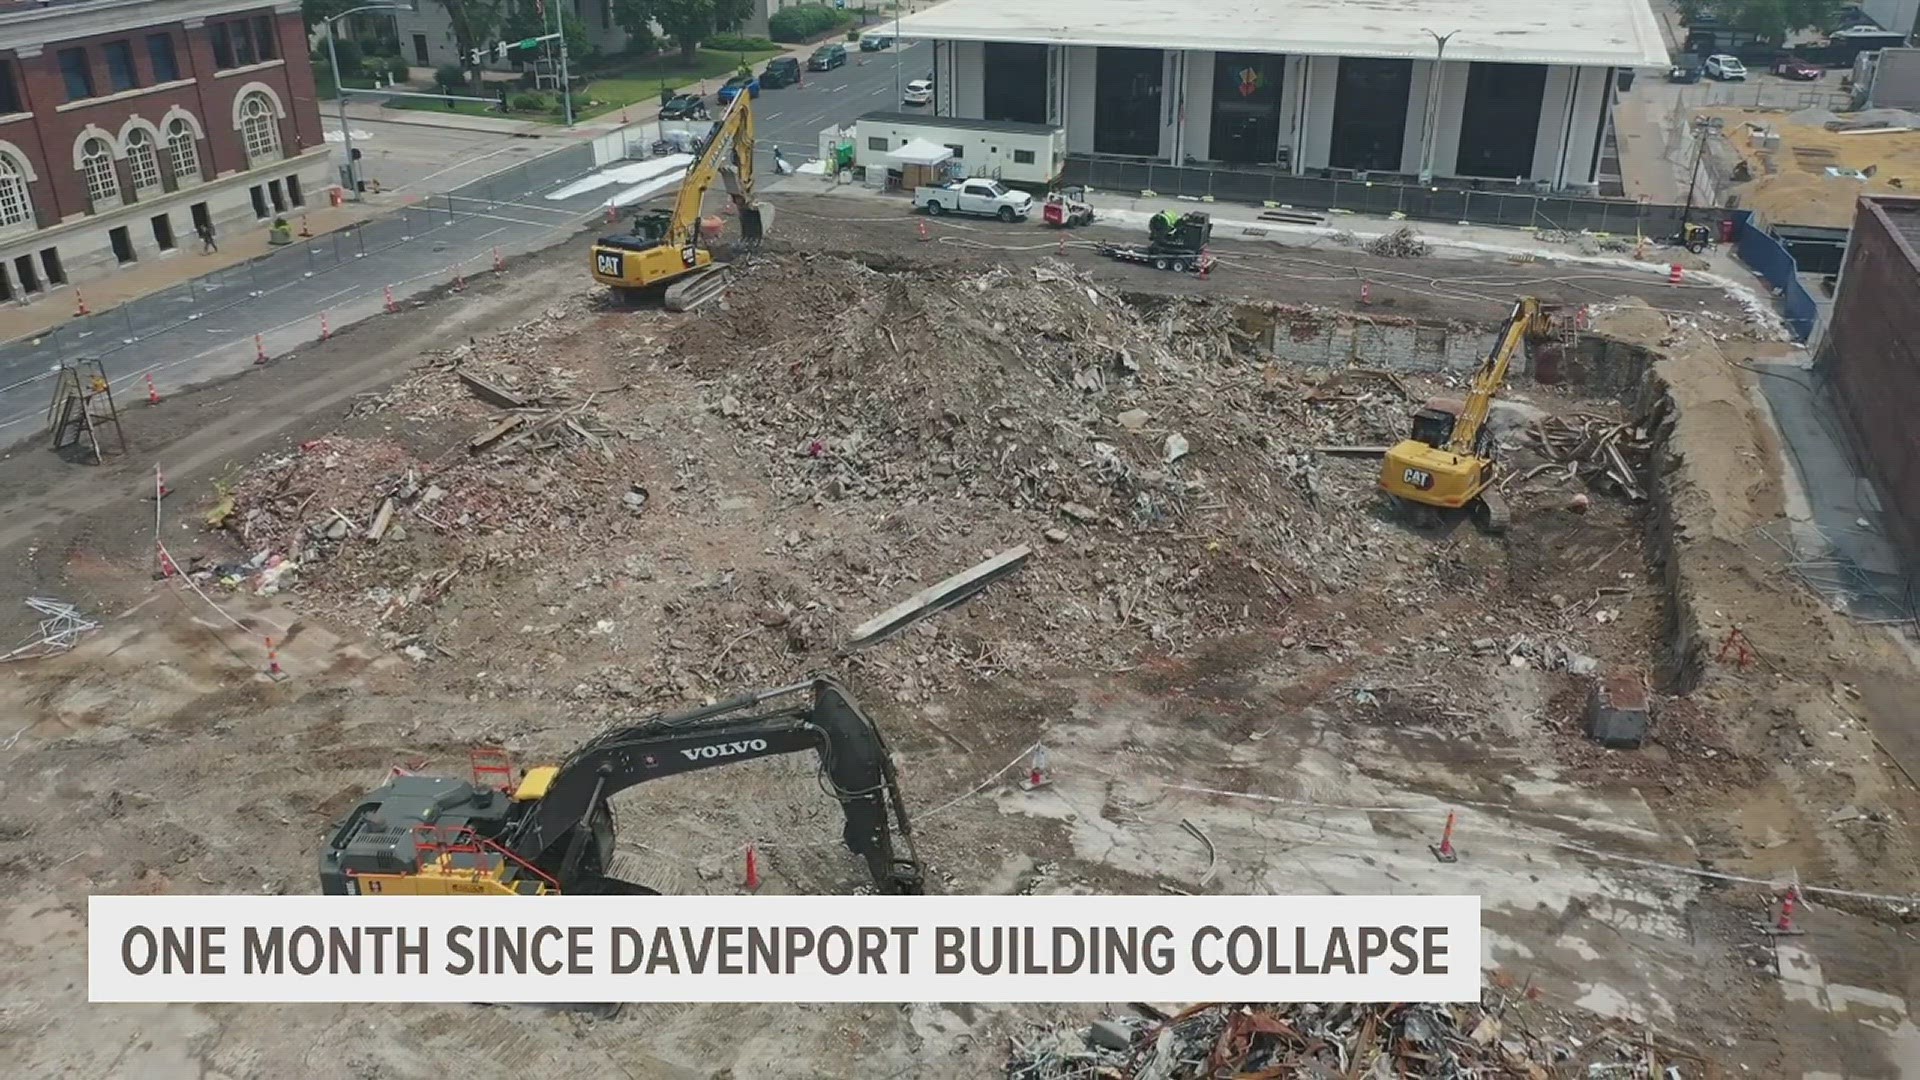 Bricks and other remaining debris fill the foundation walls of the building that stood for over a century.